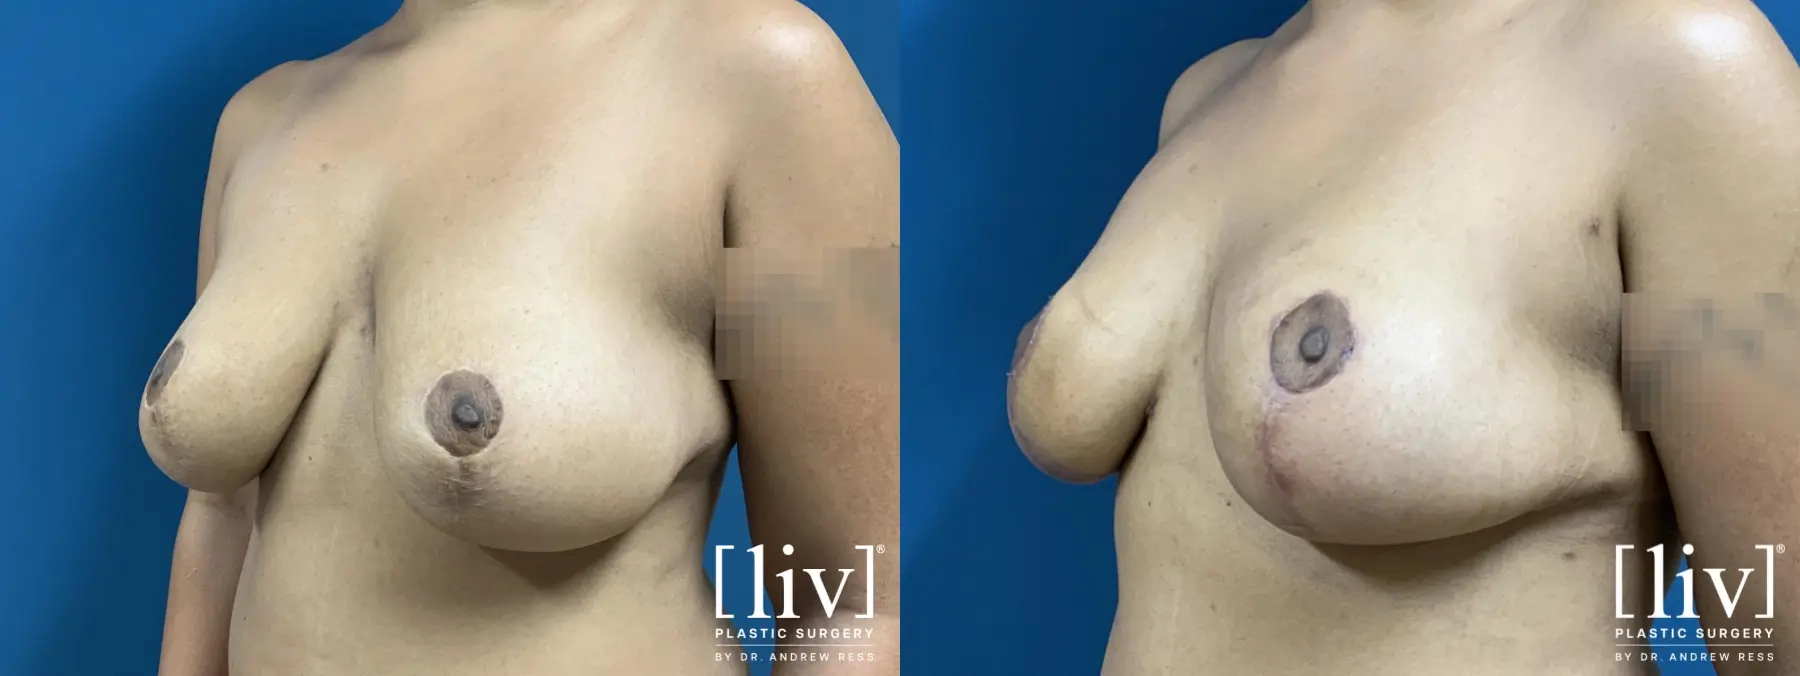 Breast Lift - Before and After 2